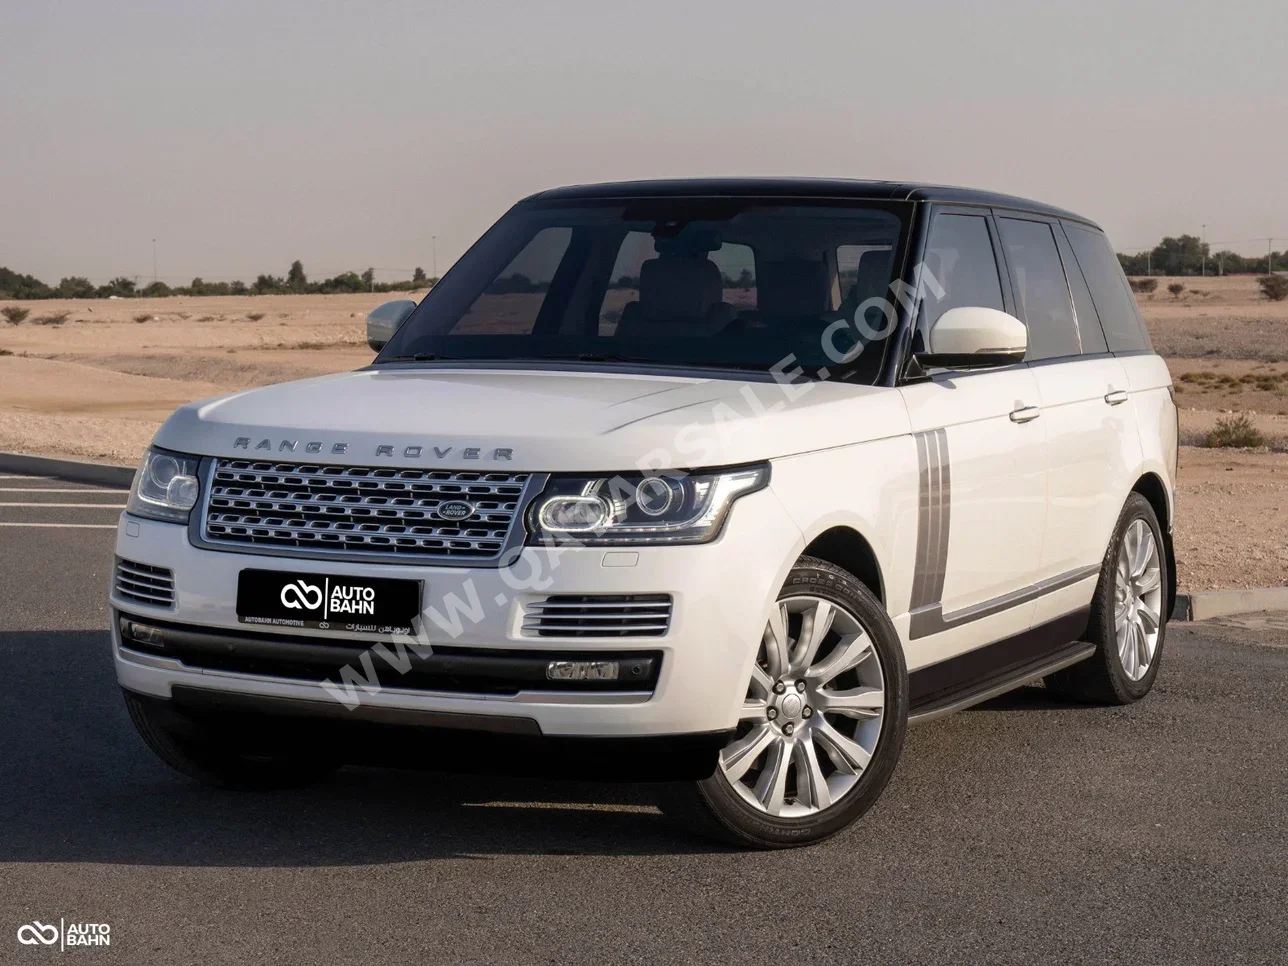 Land Rover  Range Rover  Vogue SE Super charged  2015  Automatic  88,000 Km  8 Cylinder  Four Wheel Drive (4WD)  SUV  White